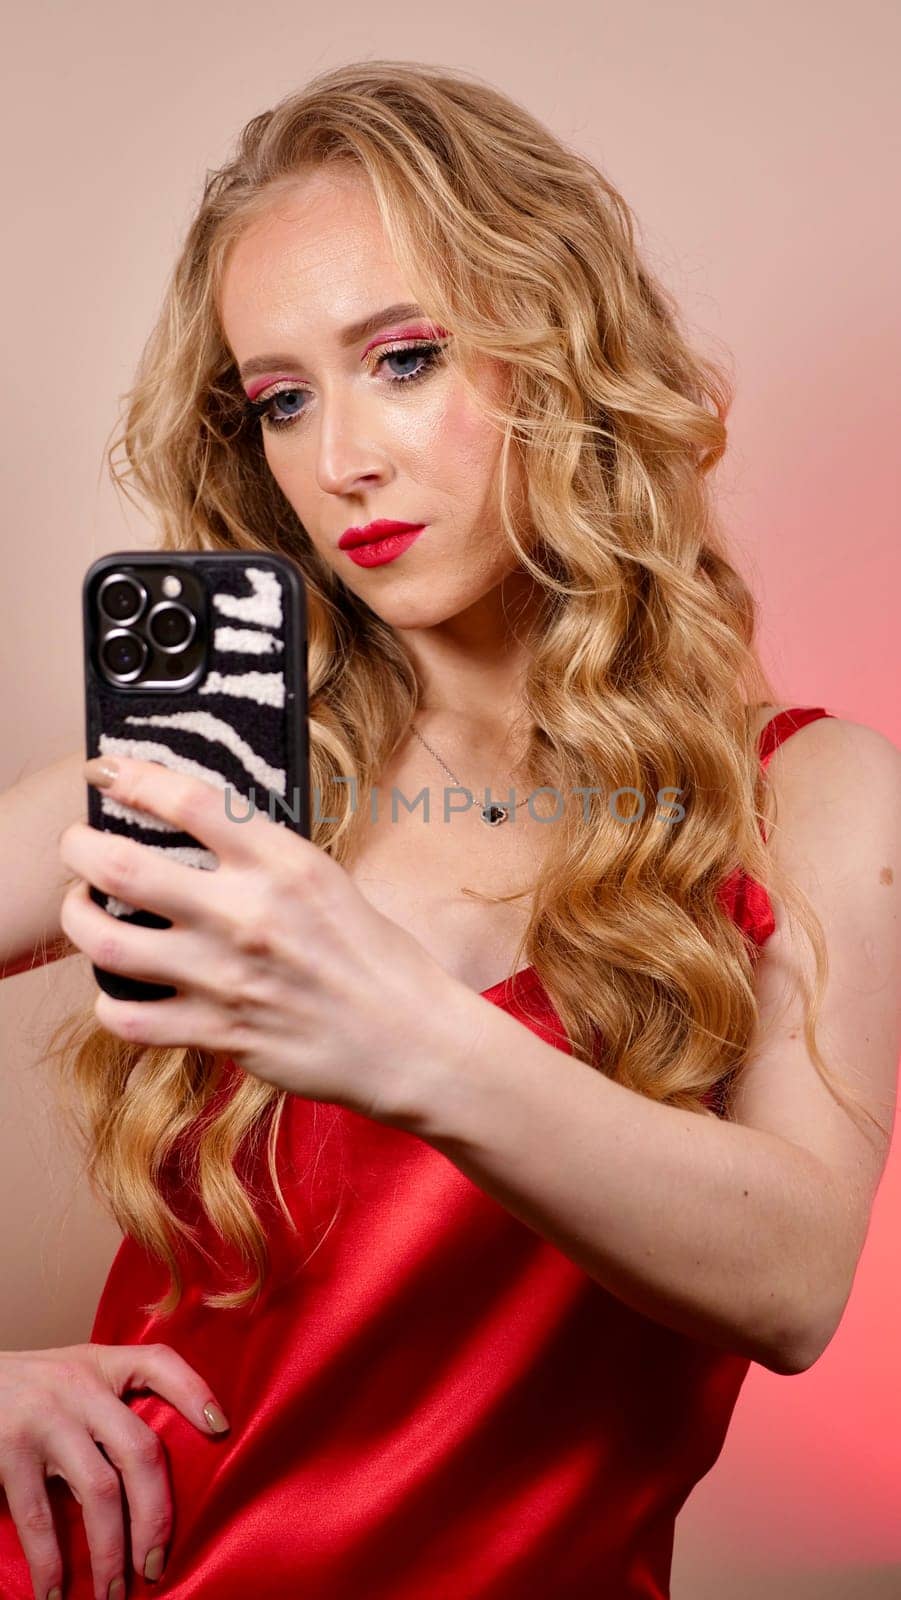 Blonde Woman with red lips Taking a Selfie by OksanaFedorchuk